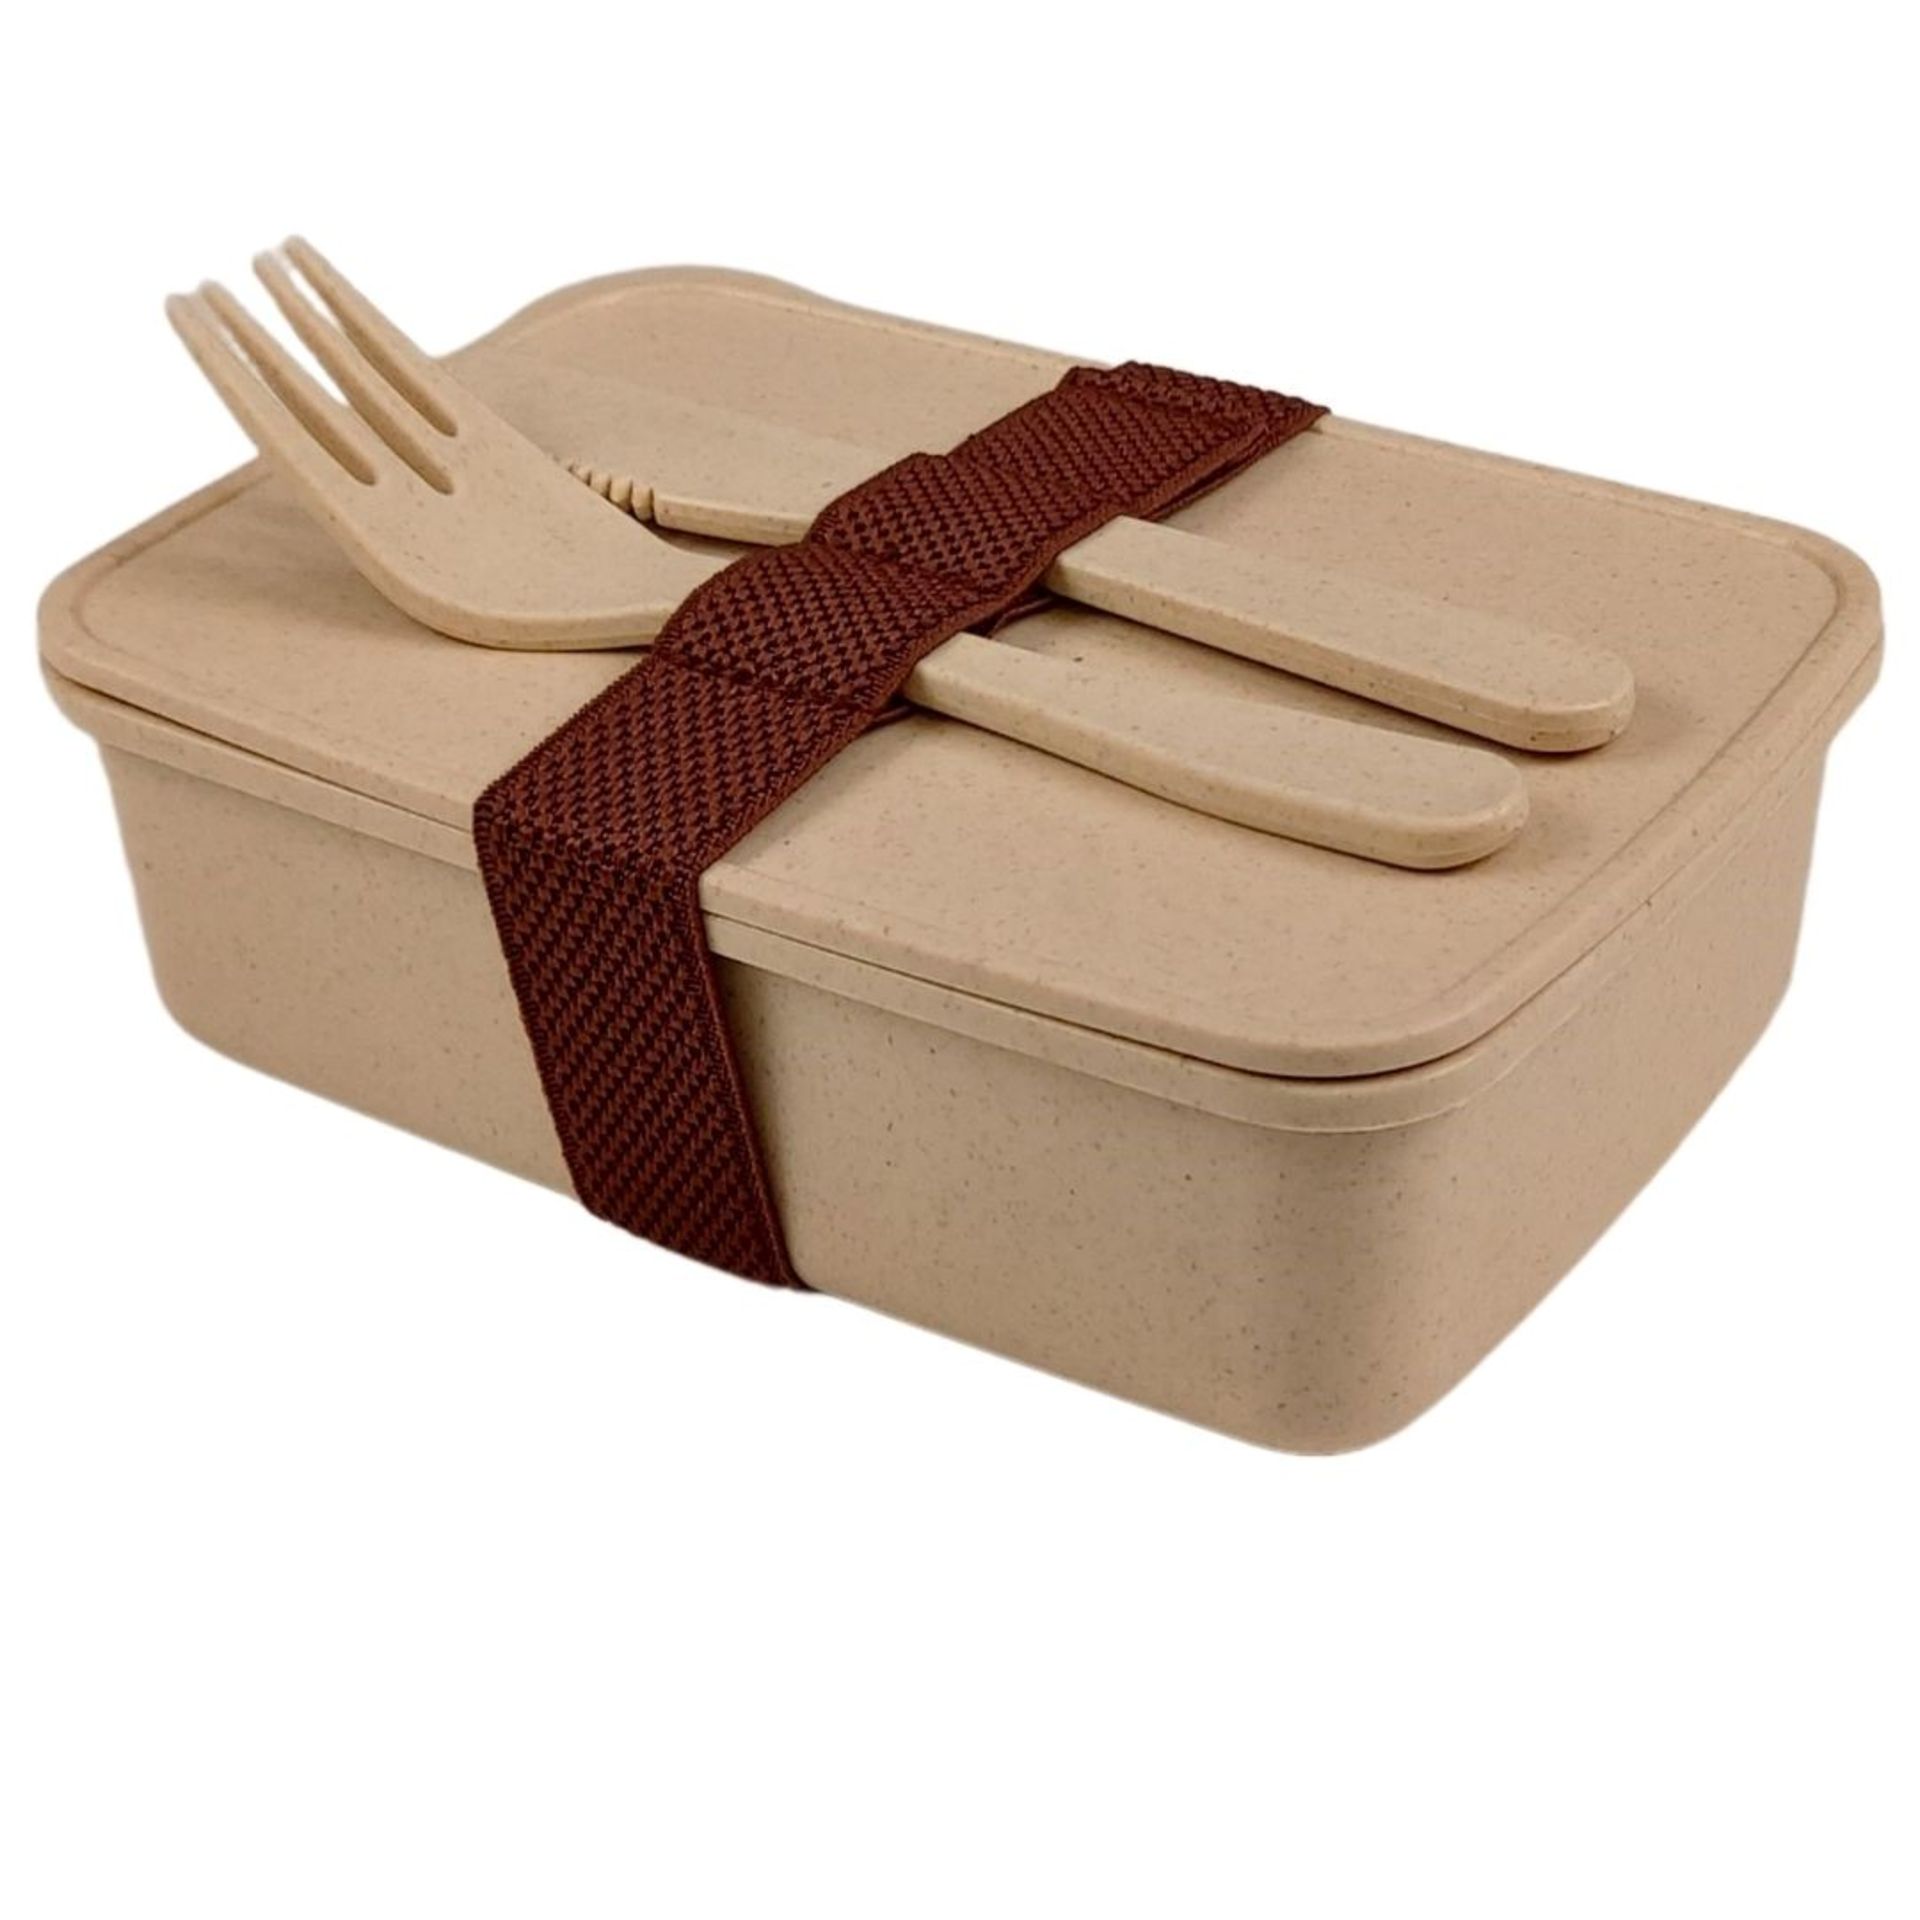 4410 x Bamboo/Wheat Eco Friendly Items | Cups | Cutlery | Sandwich Boxes - Image 6 of 6